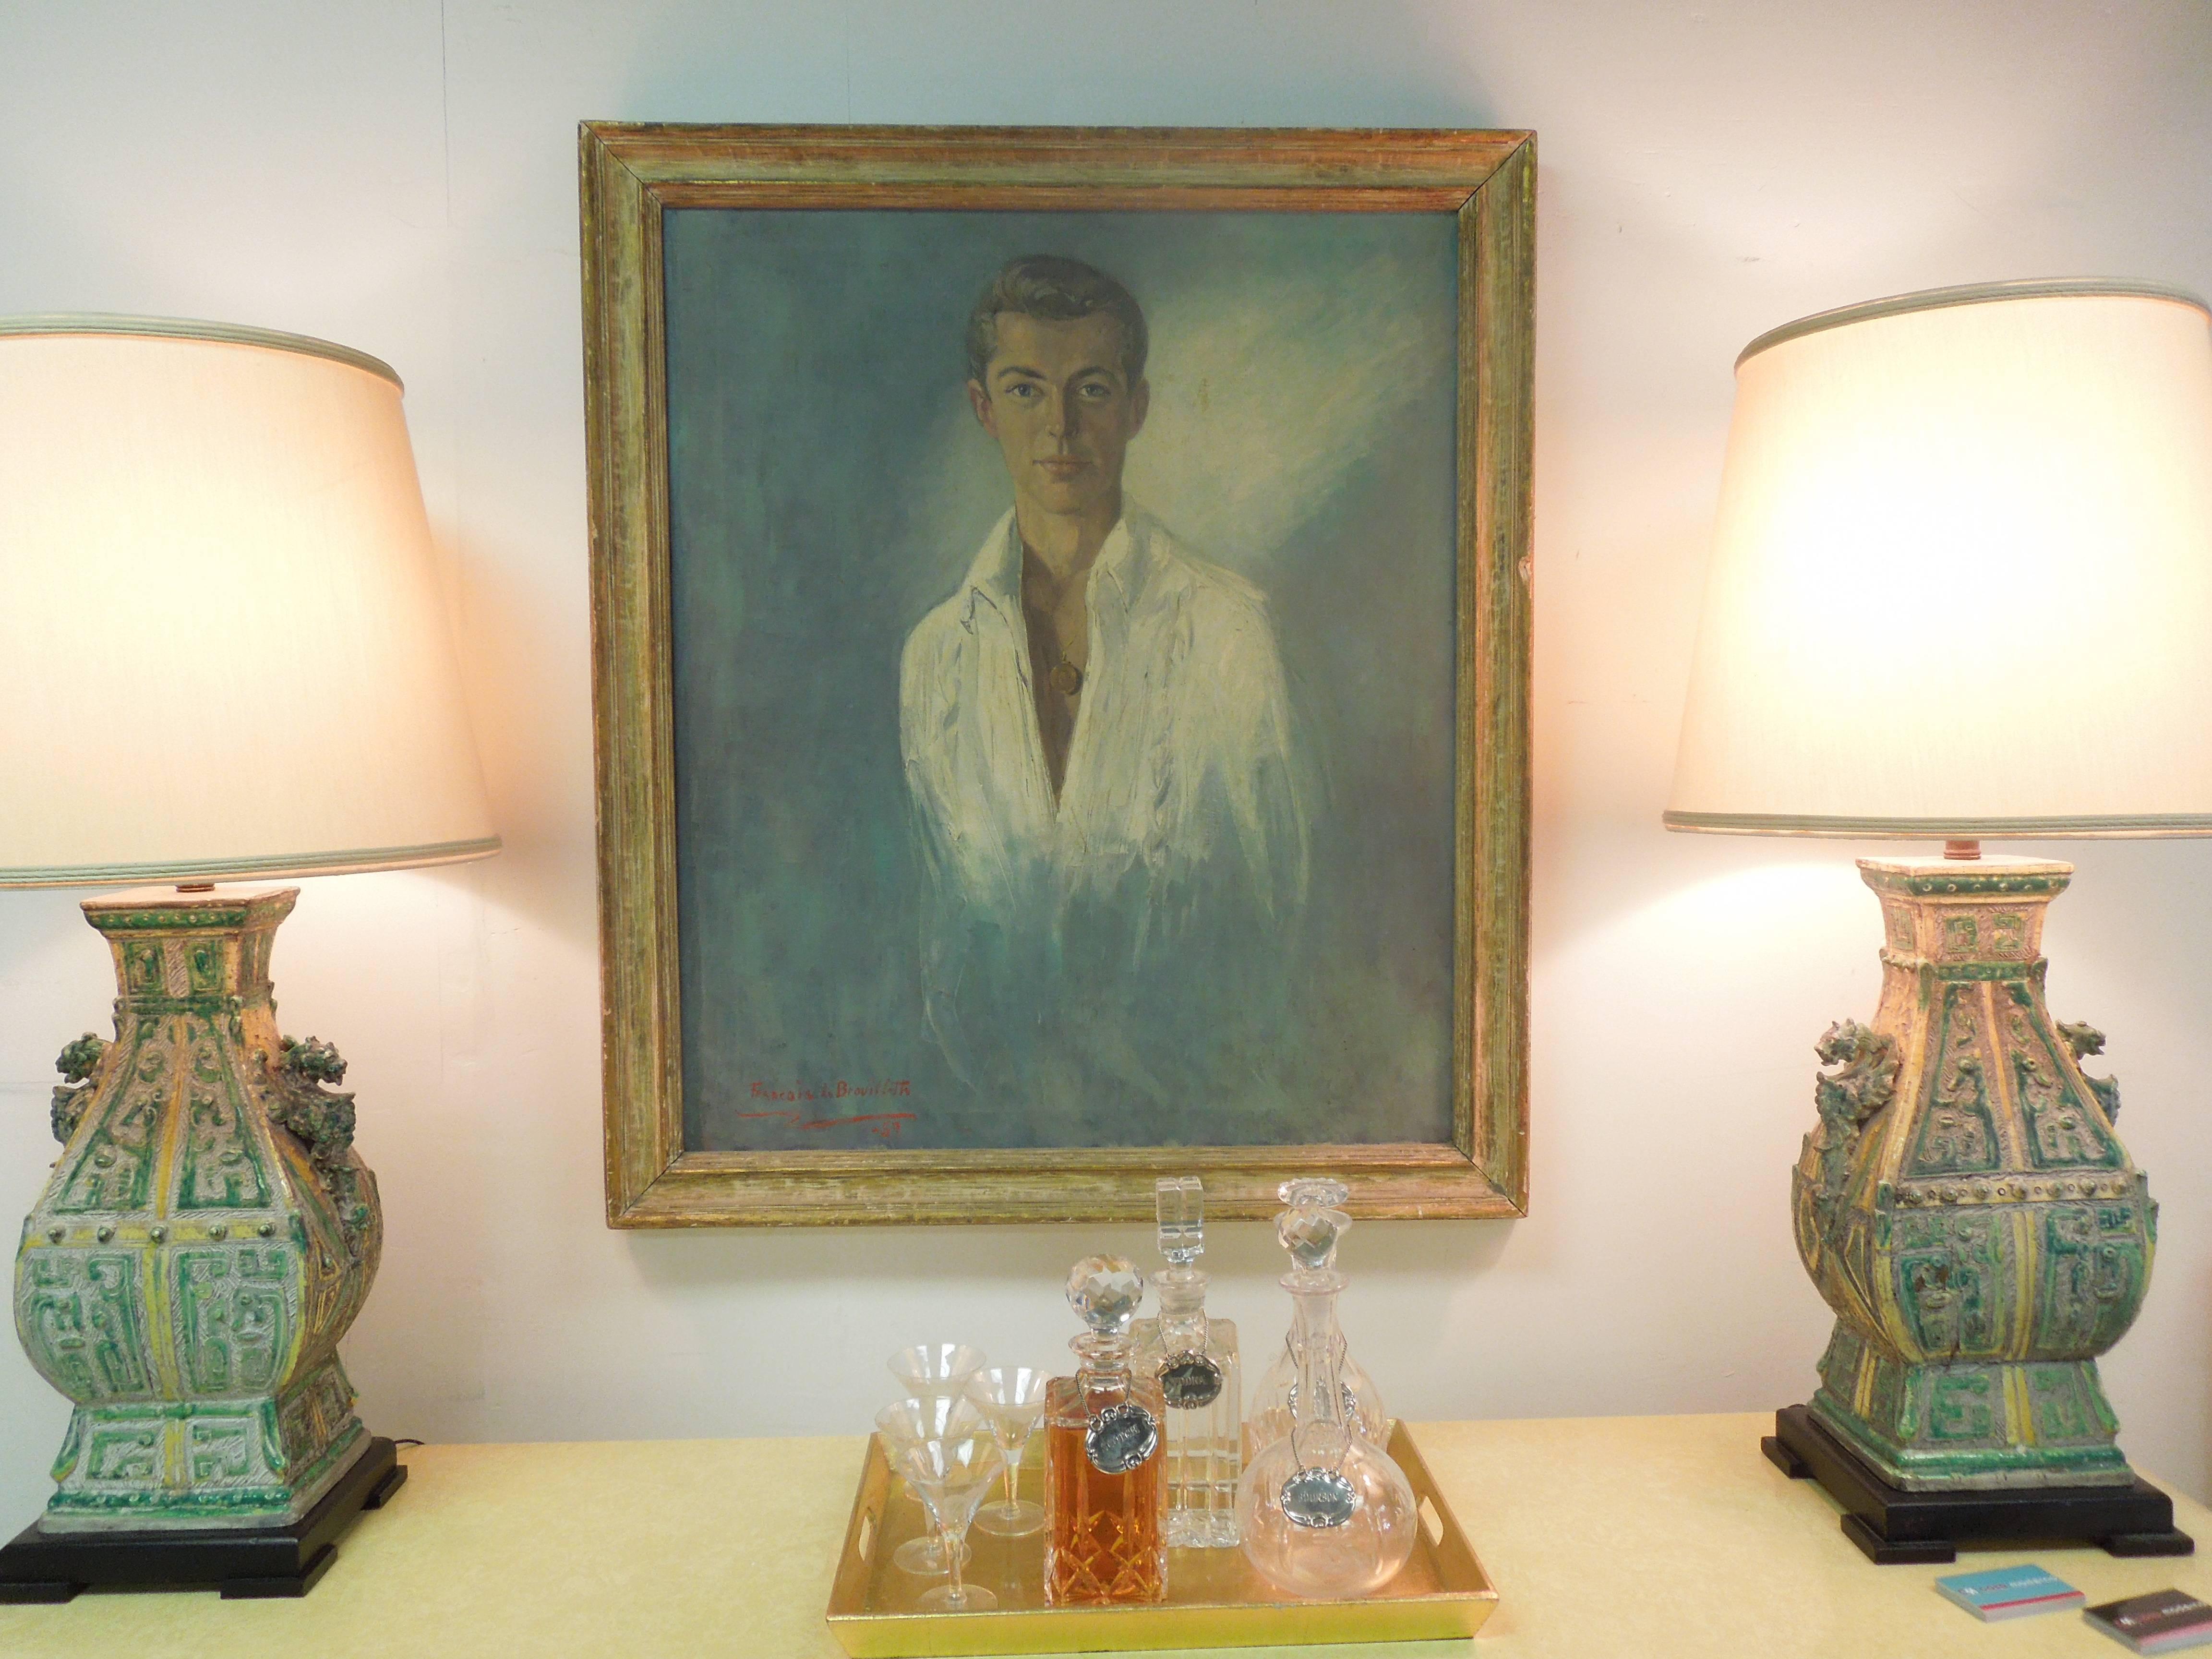 A Large beautiful portrait of Mr. Bill Harwood painted in 1959 by listed portrait artist, Francois de Brouillette. Obtains original beautiful frame. Interesting Detailed info on back of painting. Mr. Harwood was a handsome actor in Hollywood, CA.